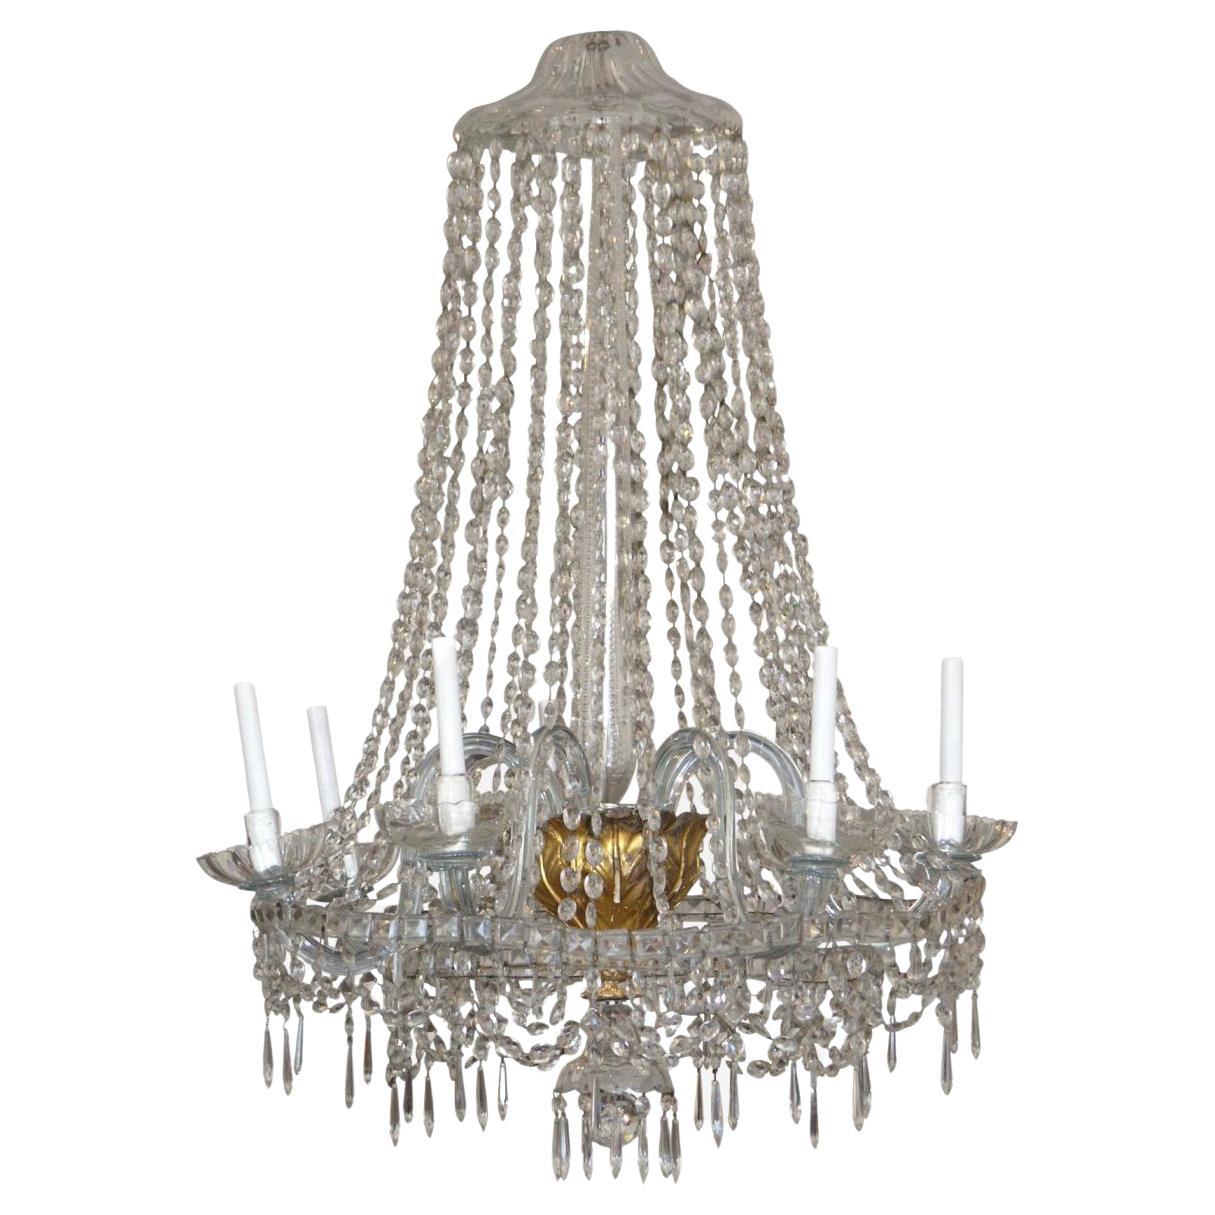 Italian Neoclassical Chandelier, 19th Century For Sale